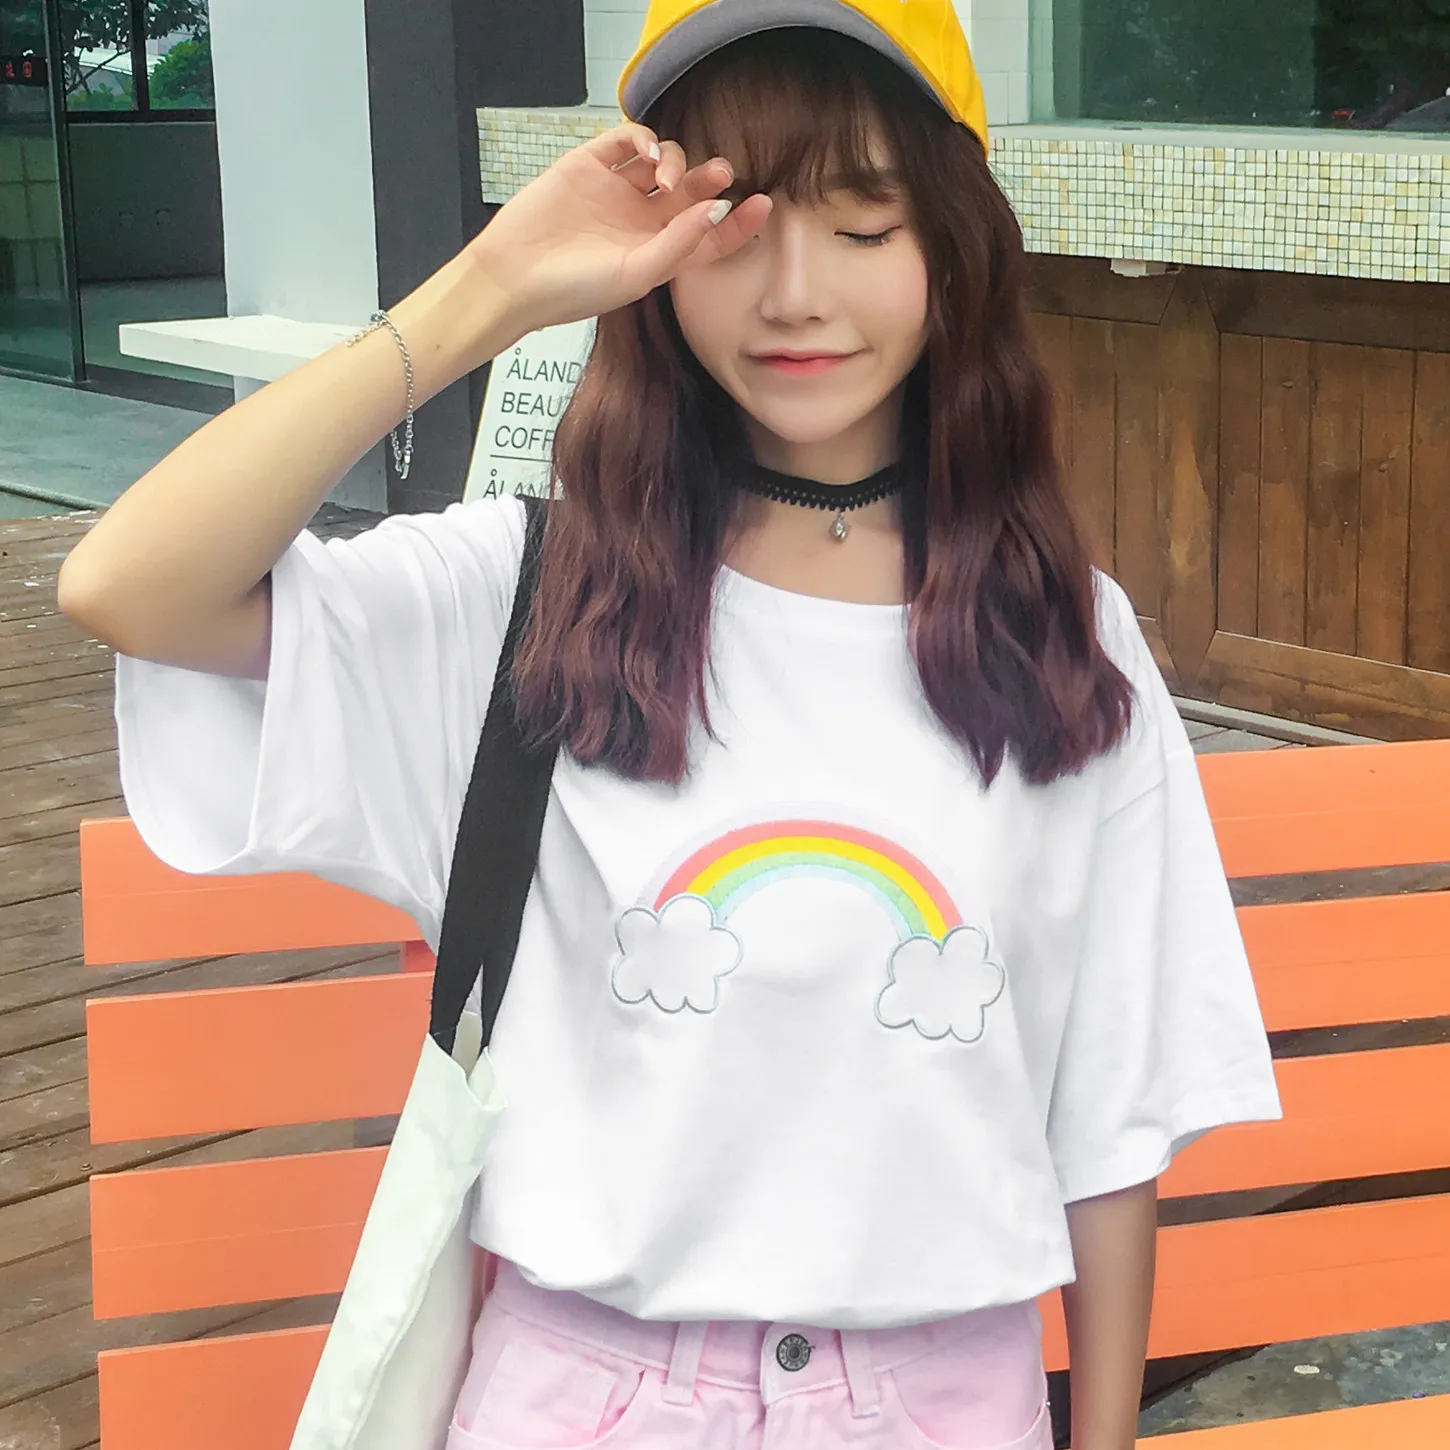 Image To film Summer school of han edition dress lovely rainbow wind embroidery female T shirt relaxed joker render unlined upper garm